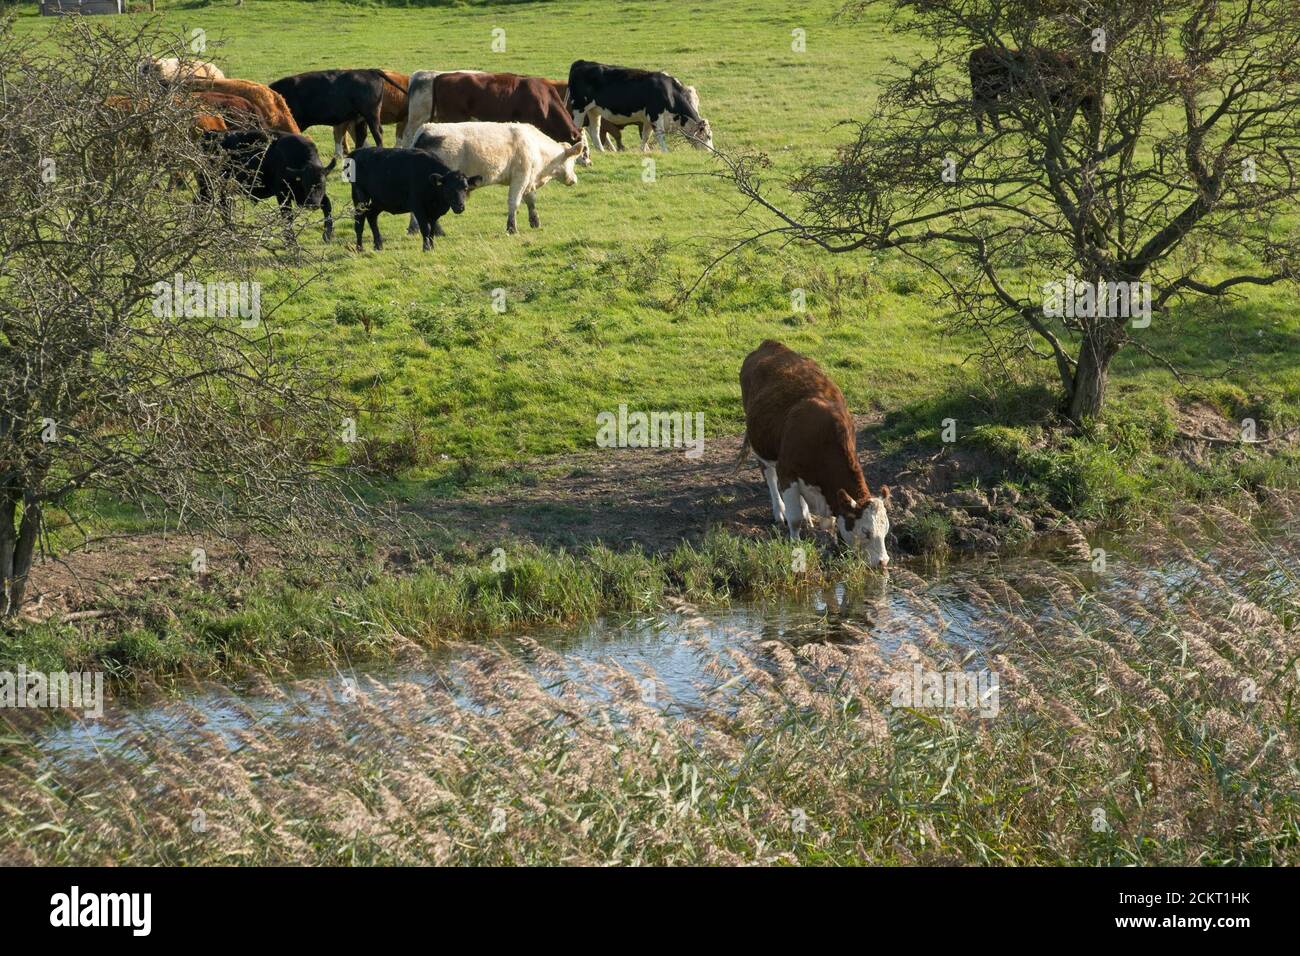 Cow drinking water from natural source, standing at waters edge. Reflection in the water. Reeds in foreground, Cows in background. Landscape format. Stock Photo